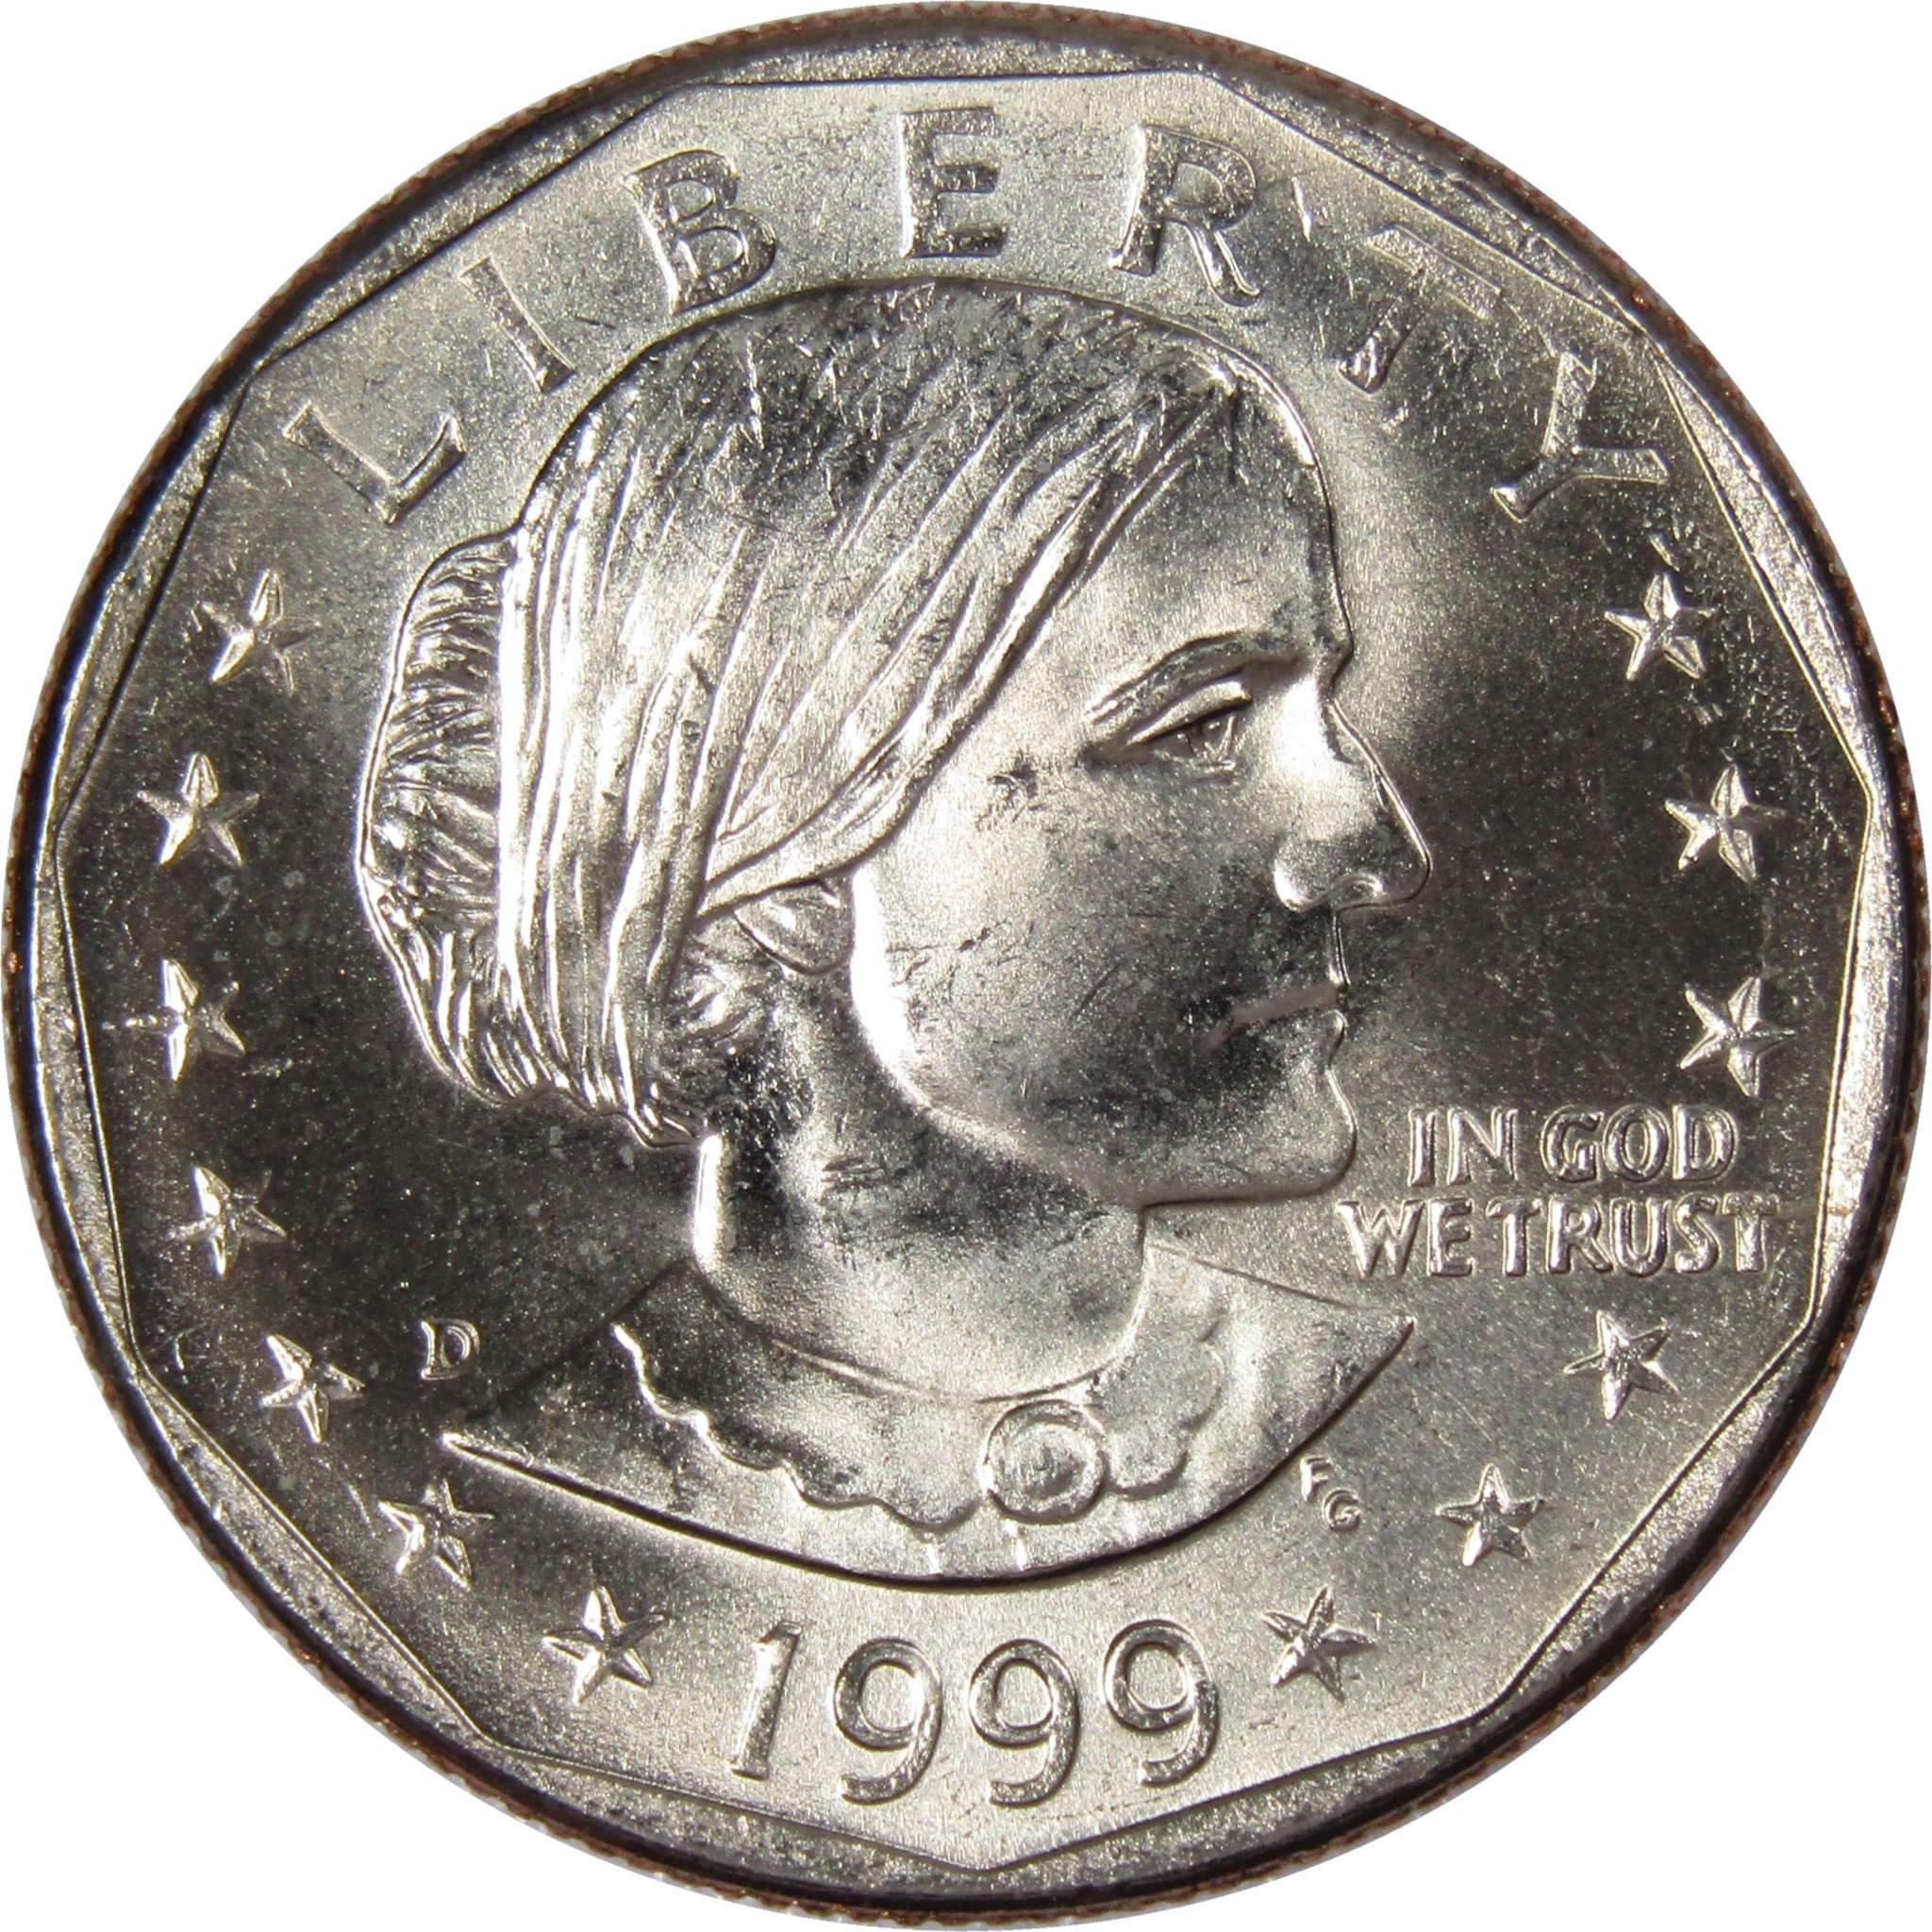 1999 D Susan B Anthony Dollar BU Uncirculated Mint State SBA $1 US Coin